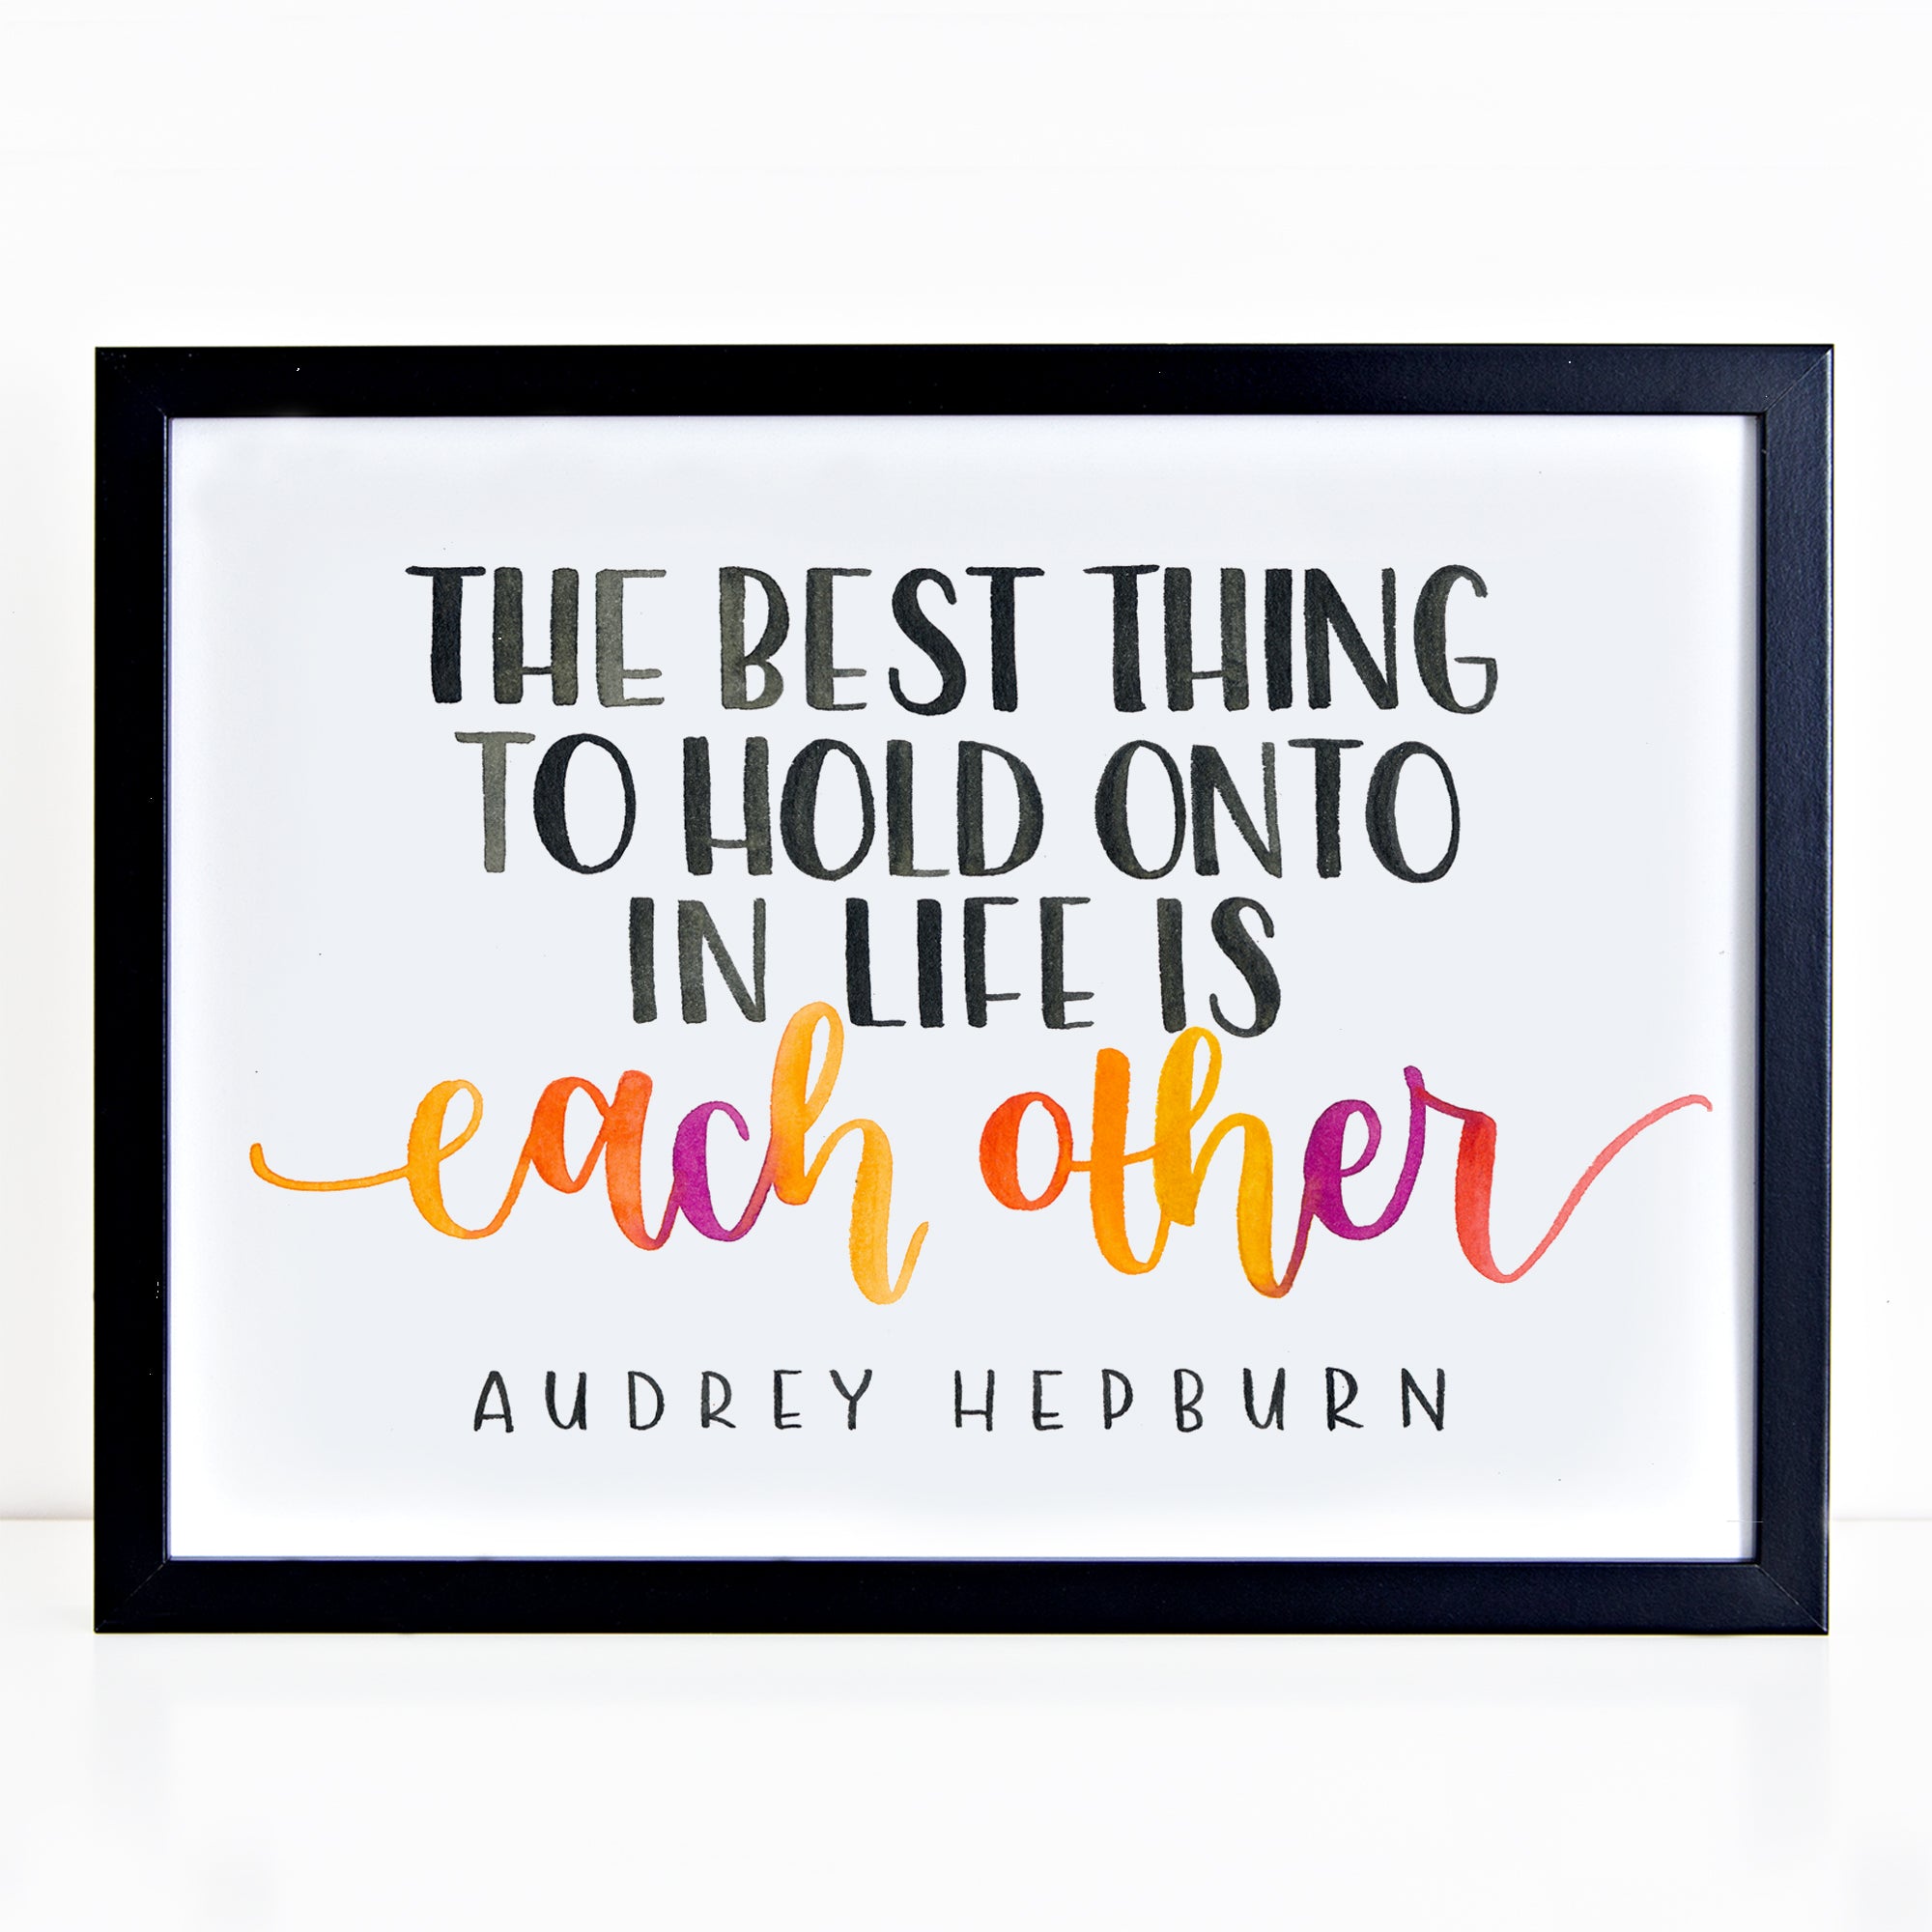 Motivational wall art - The best thing to hold onto in life is each other